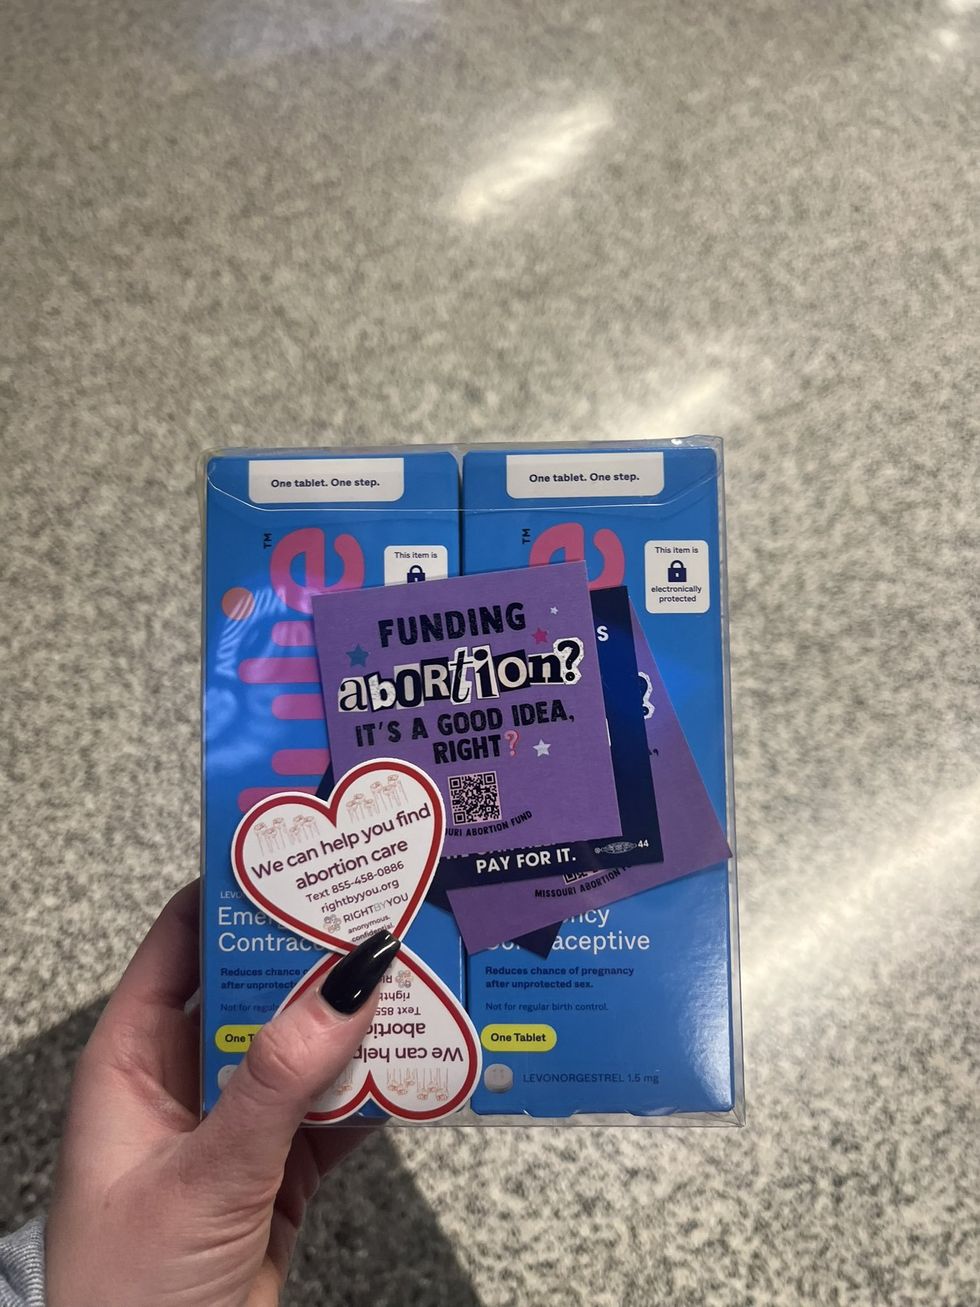 Photo of the Plan B and condoms Olivia Rodrigo handed out at her concert